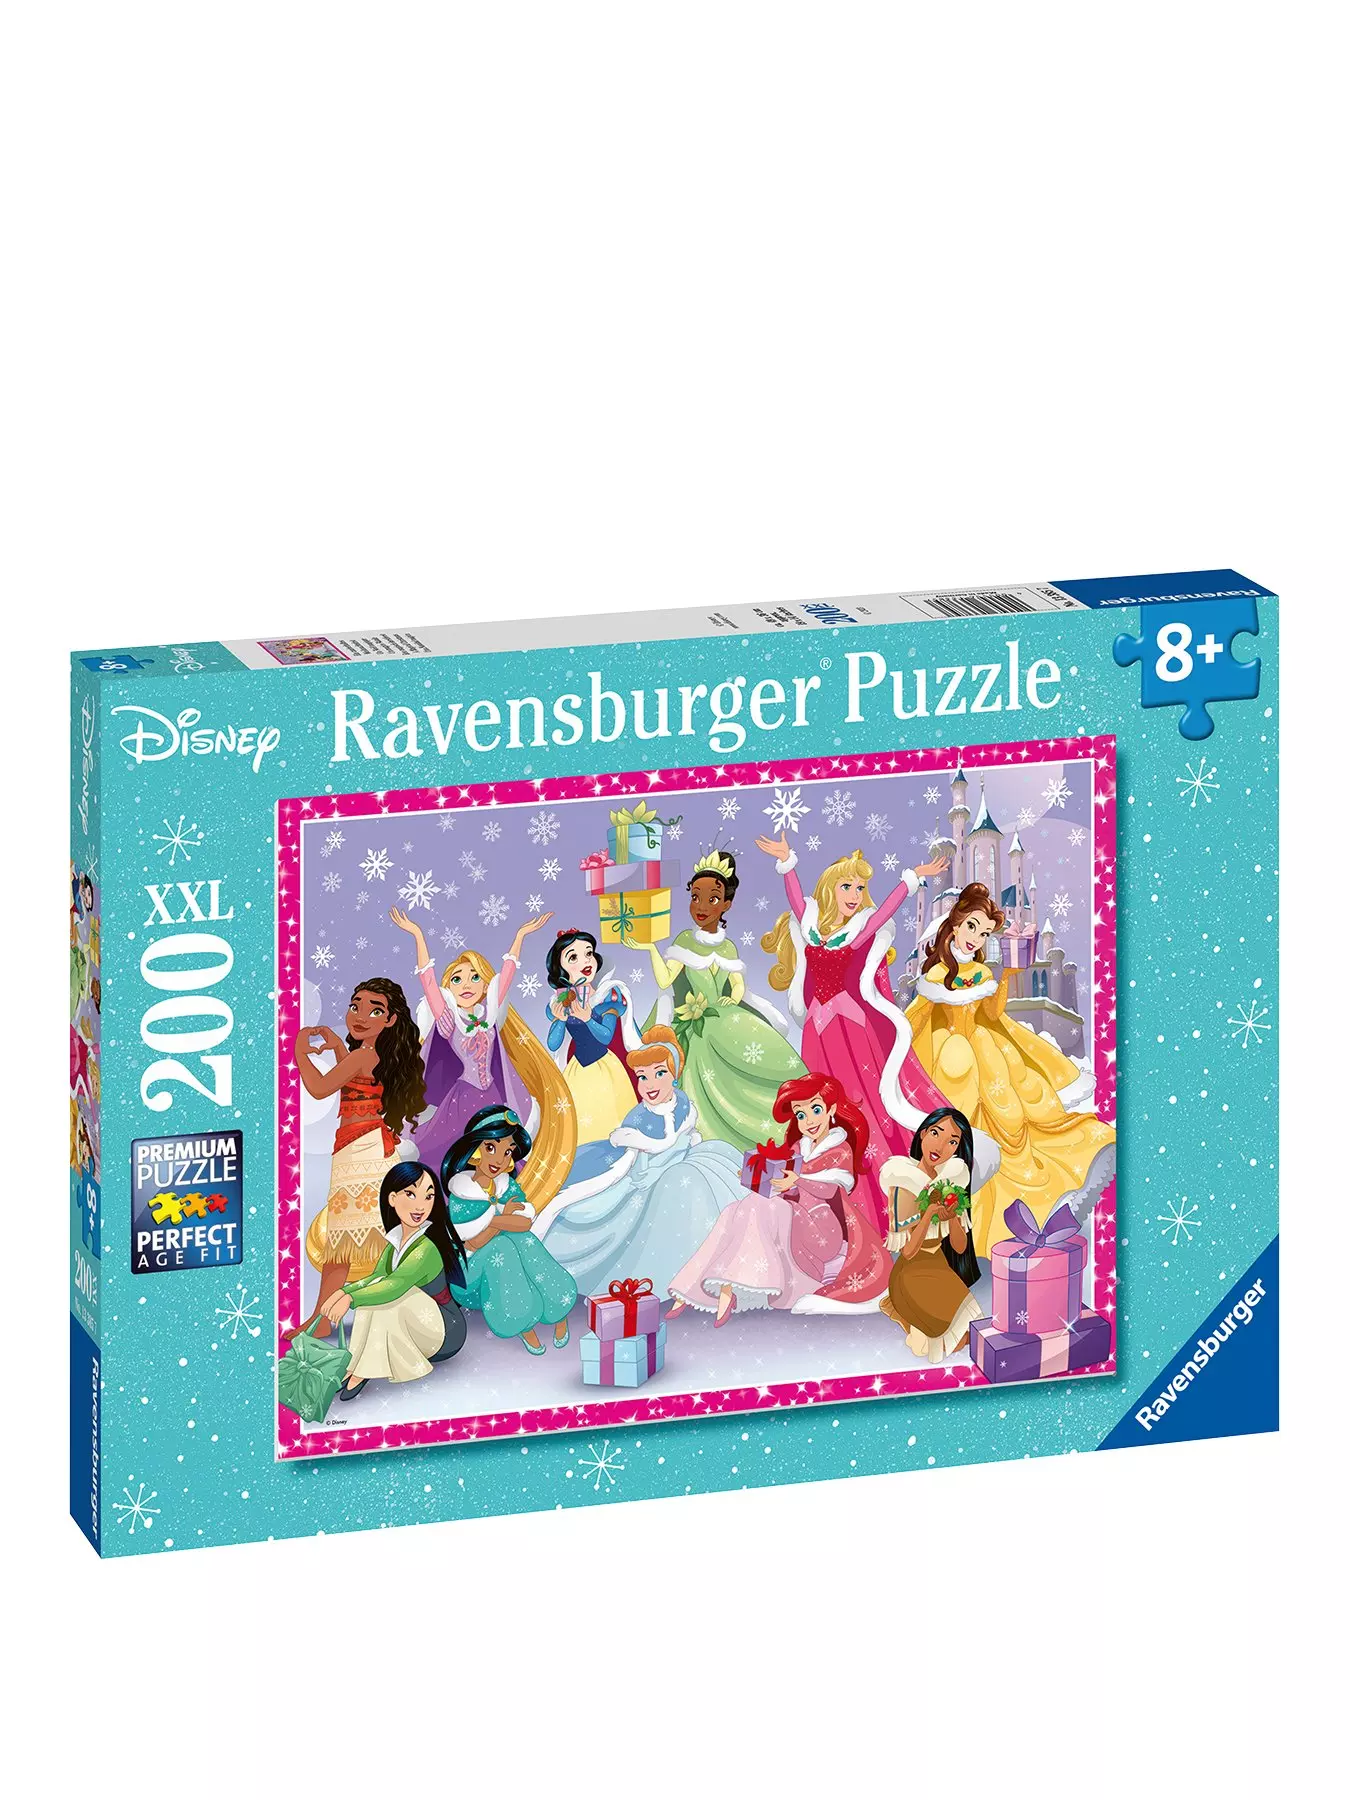 Ravensburger Chef's Delight 200 Piece Jigsaw Puzzle for Adults & Kids Age  10 Years Up - Food Puzzles [ Exclusive]